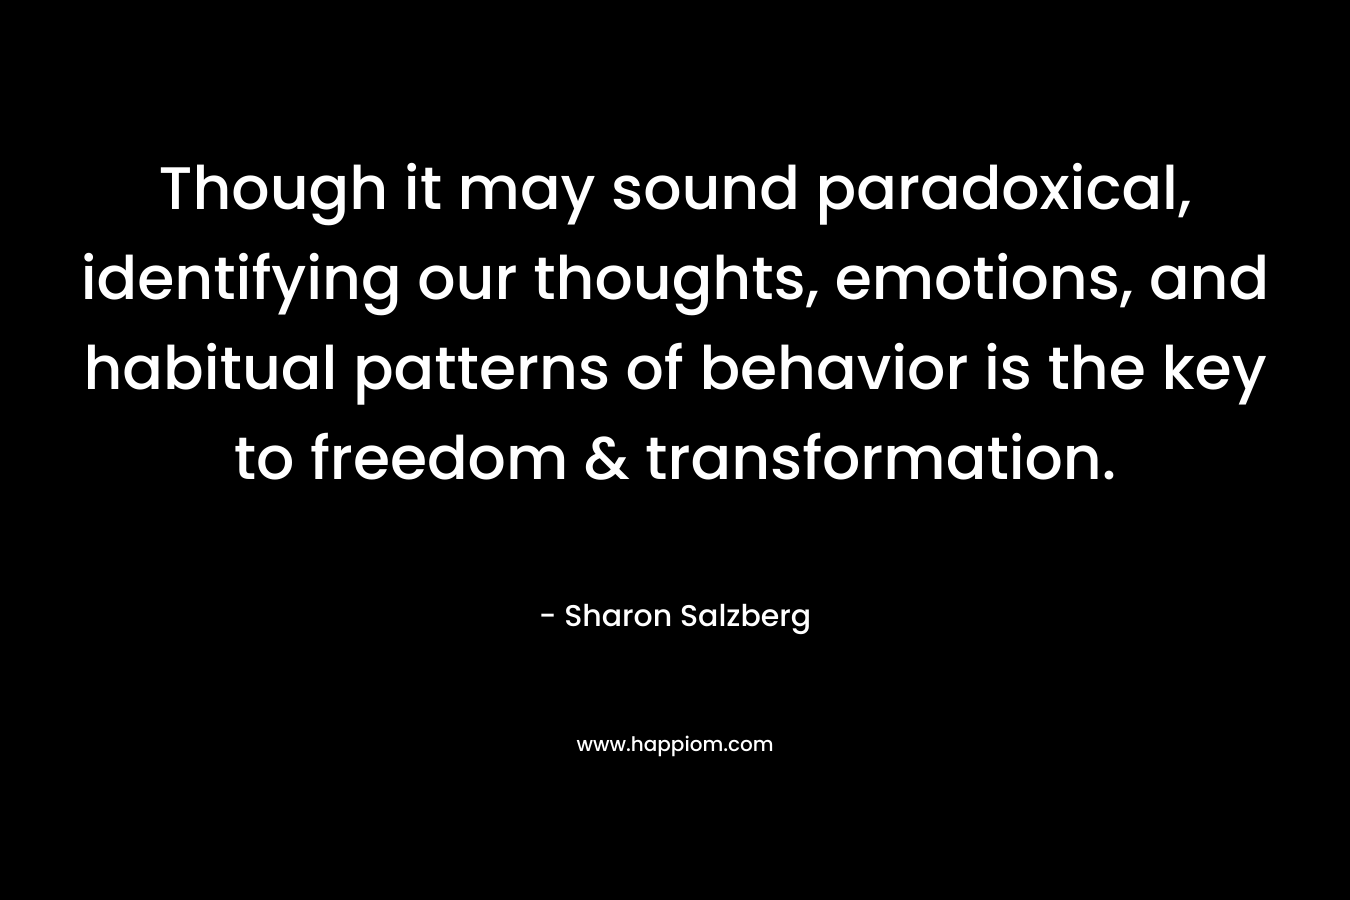 Though it may sound paradoxical, identifying our thoughts, emotions, and habitual patterns of behavior is the key to freedom & transformation.